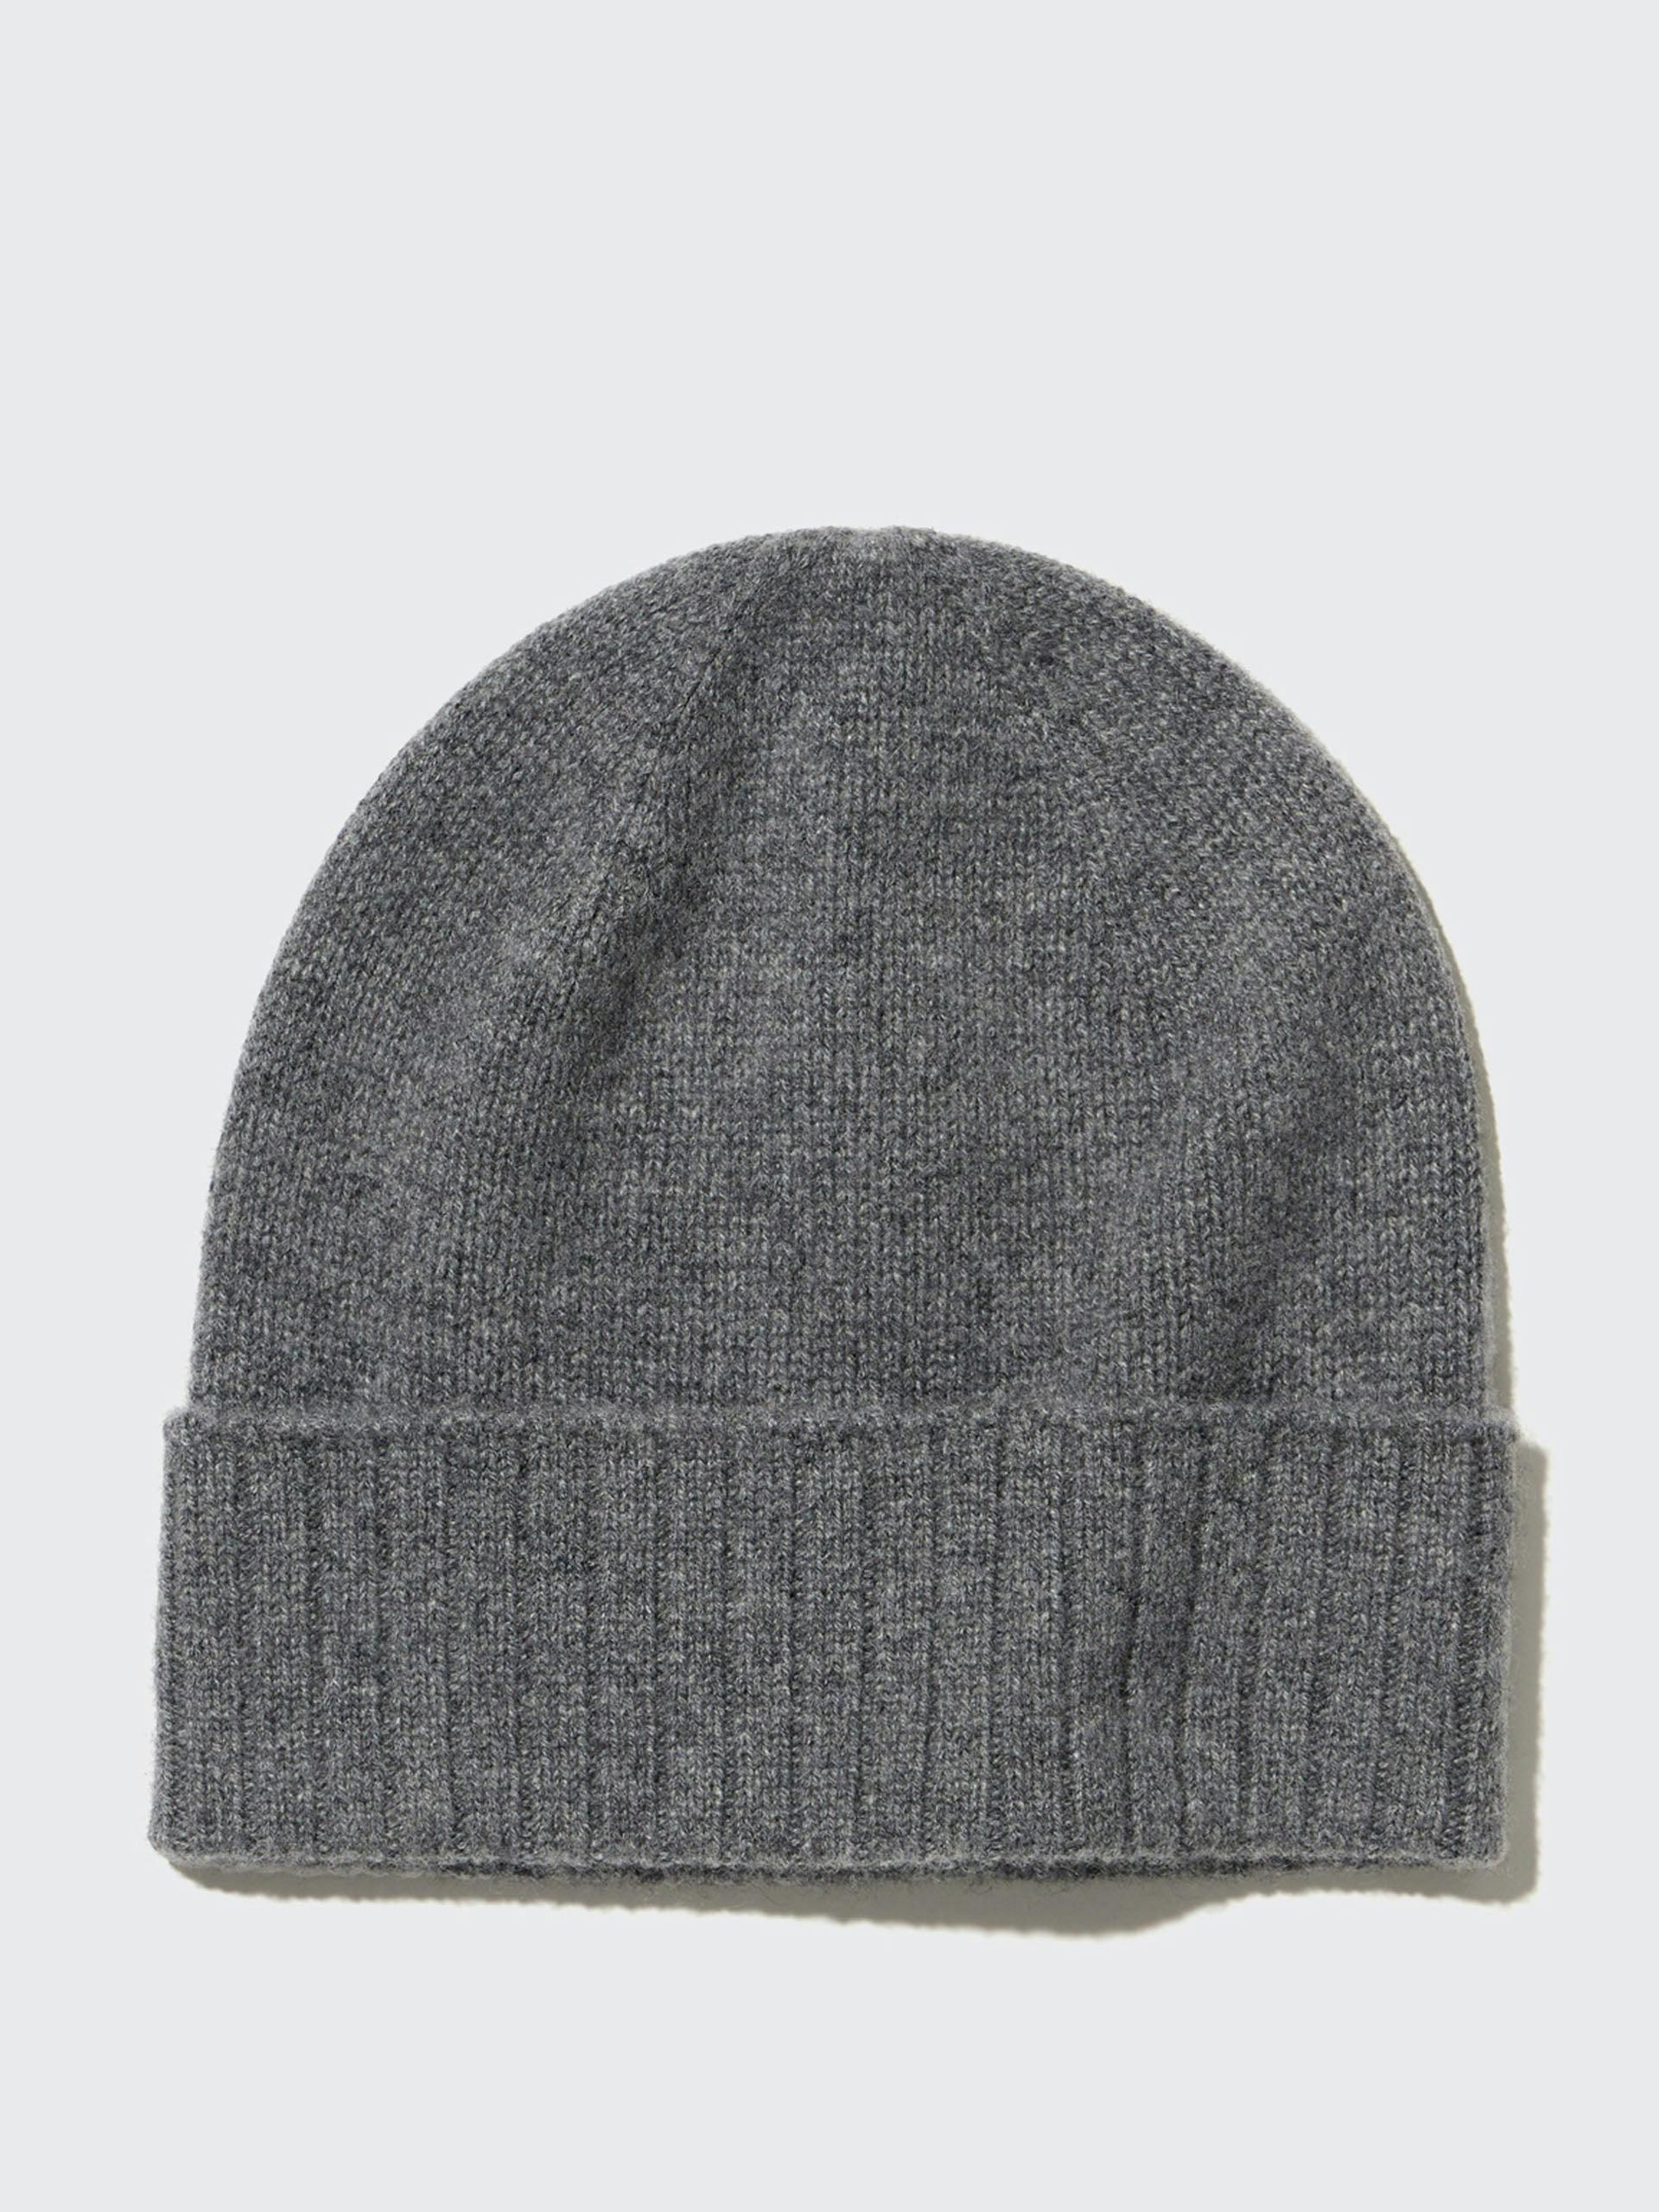 Grey cashmere knitted beanie